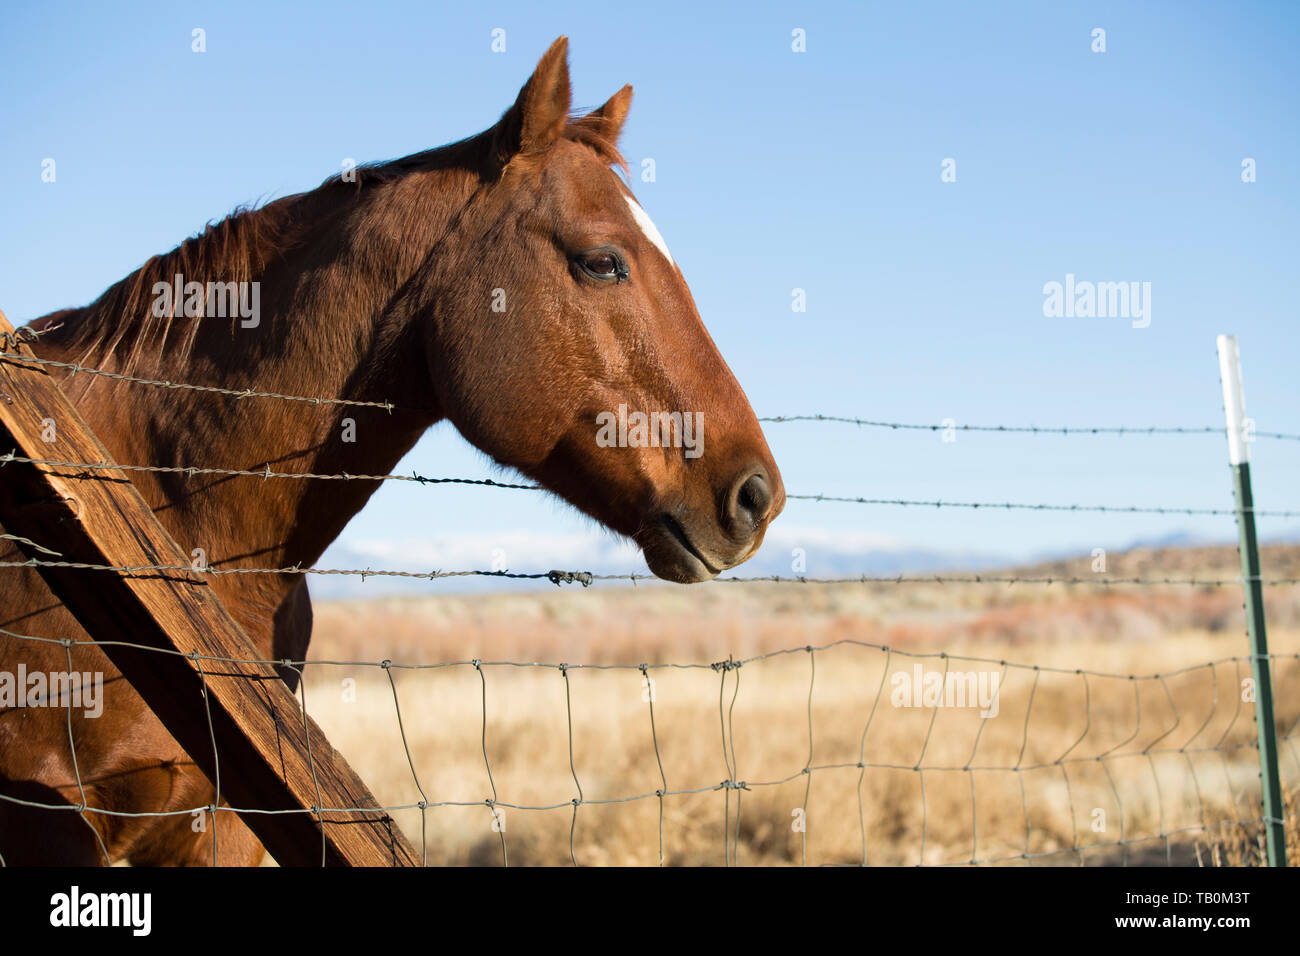 Brown horse with white forehead marking stands at barbed wire fence in afternoon sun. Stock Photo